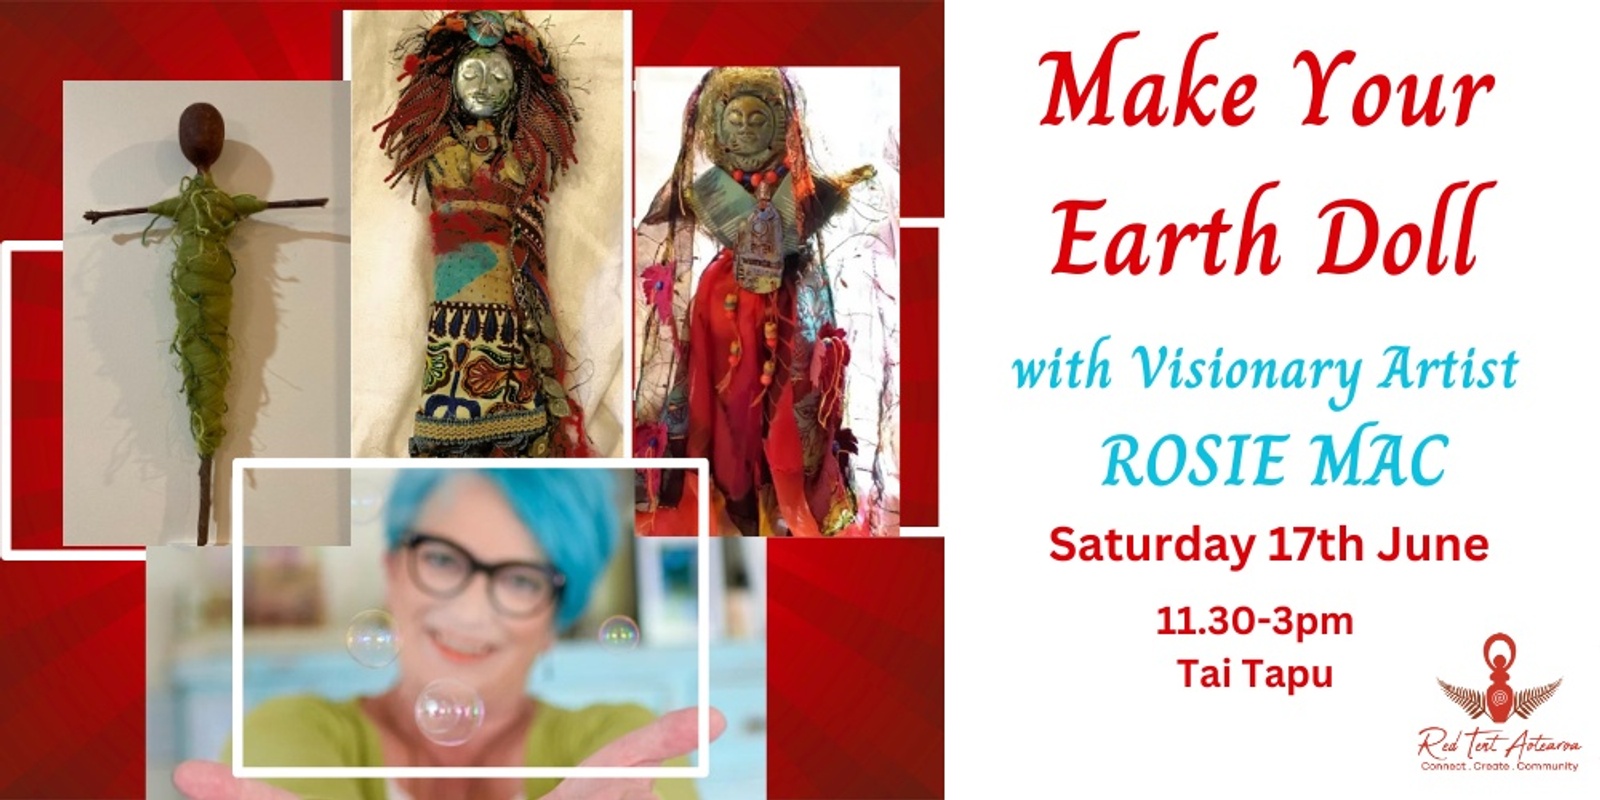 Earth Doll Workshop with Visionary Artist ROSIE MAC!